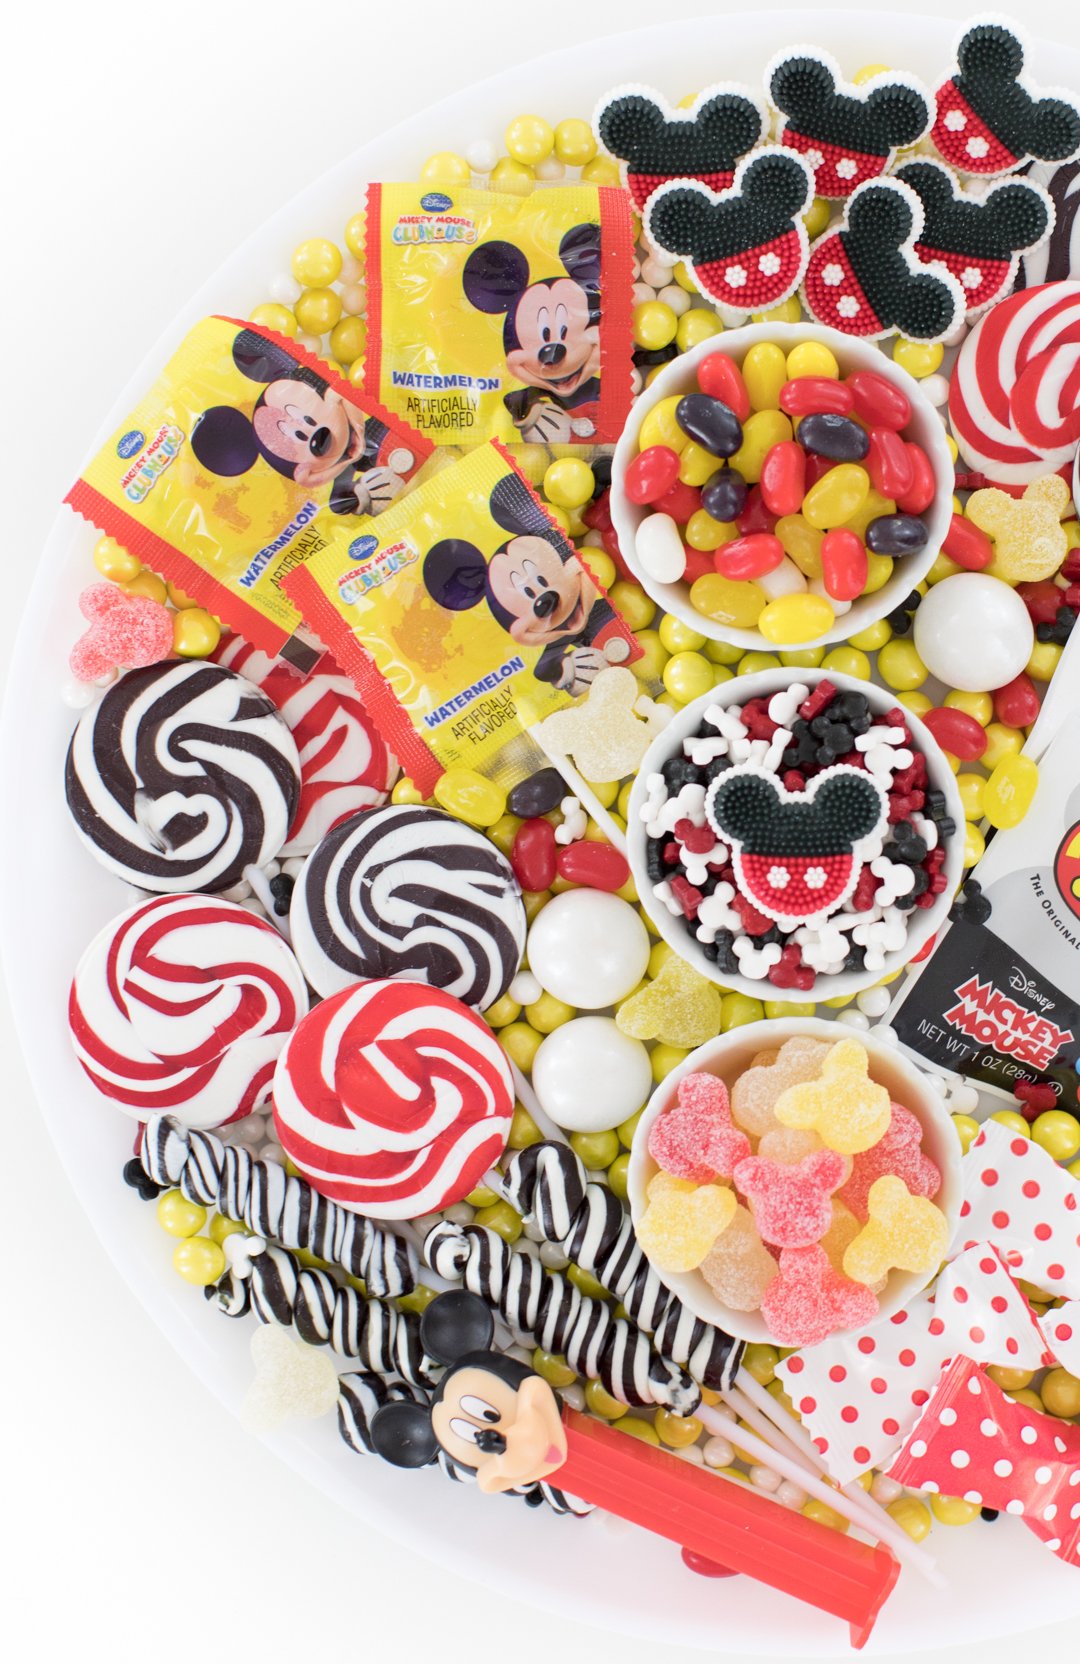 disney mickey mouse party platter filled with mickey candies and lollipops